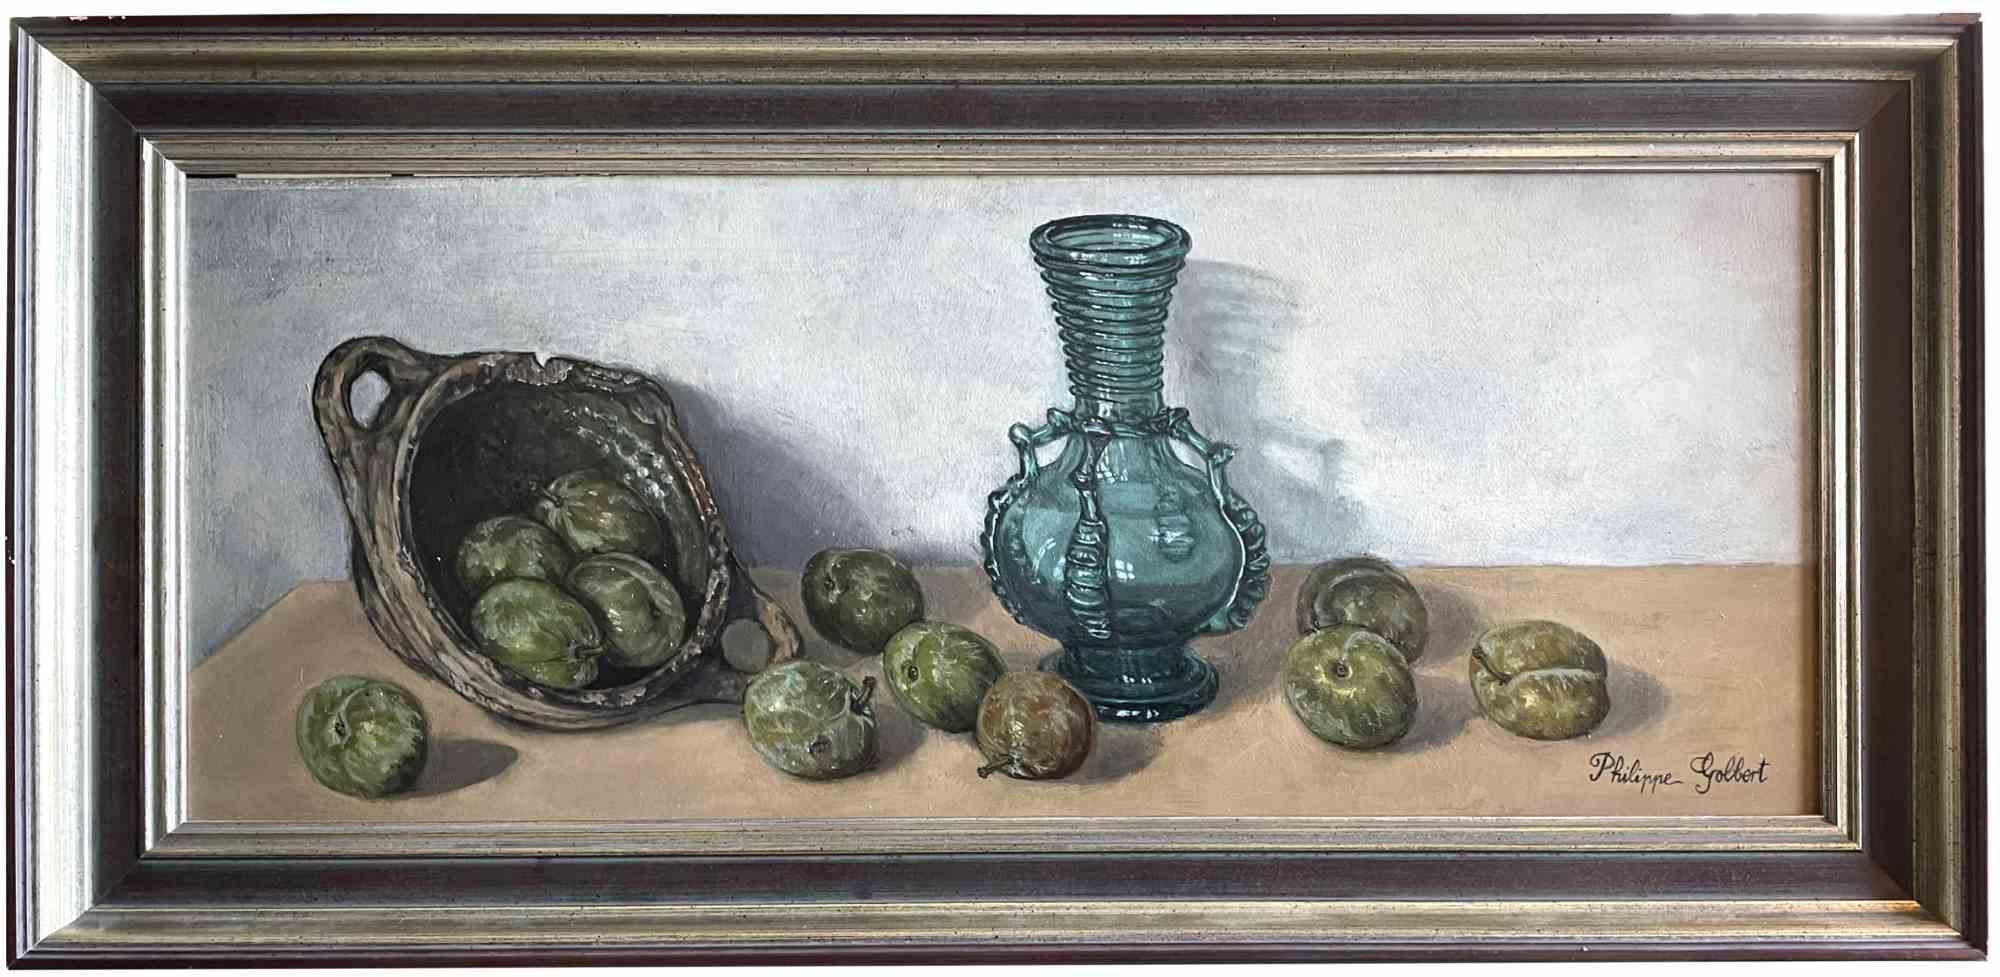 Still Life is an original artwork realized by Philippe Golbert.

Oil on Panel, mid-20th Century.

Handsigned in the lower right margin.

25 x 60 cm. Framed 40x75 cm.

Good conditons!